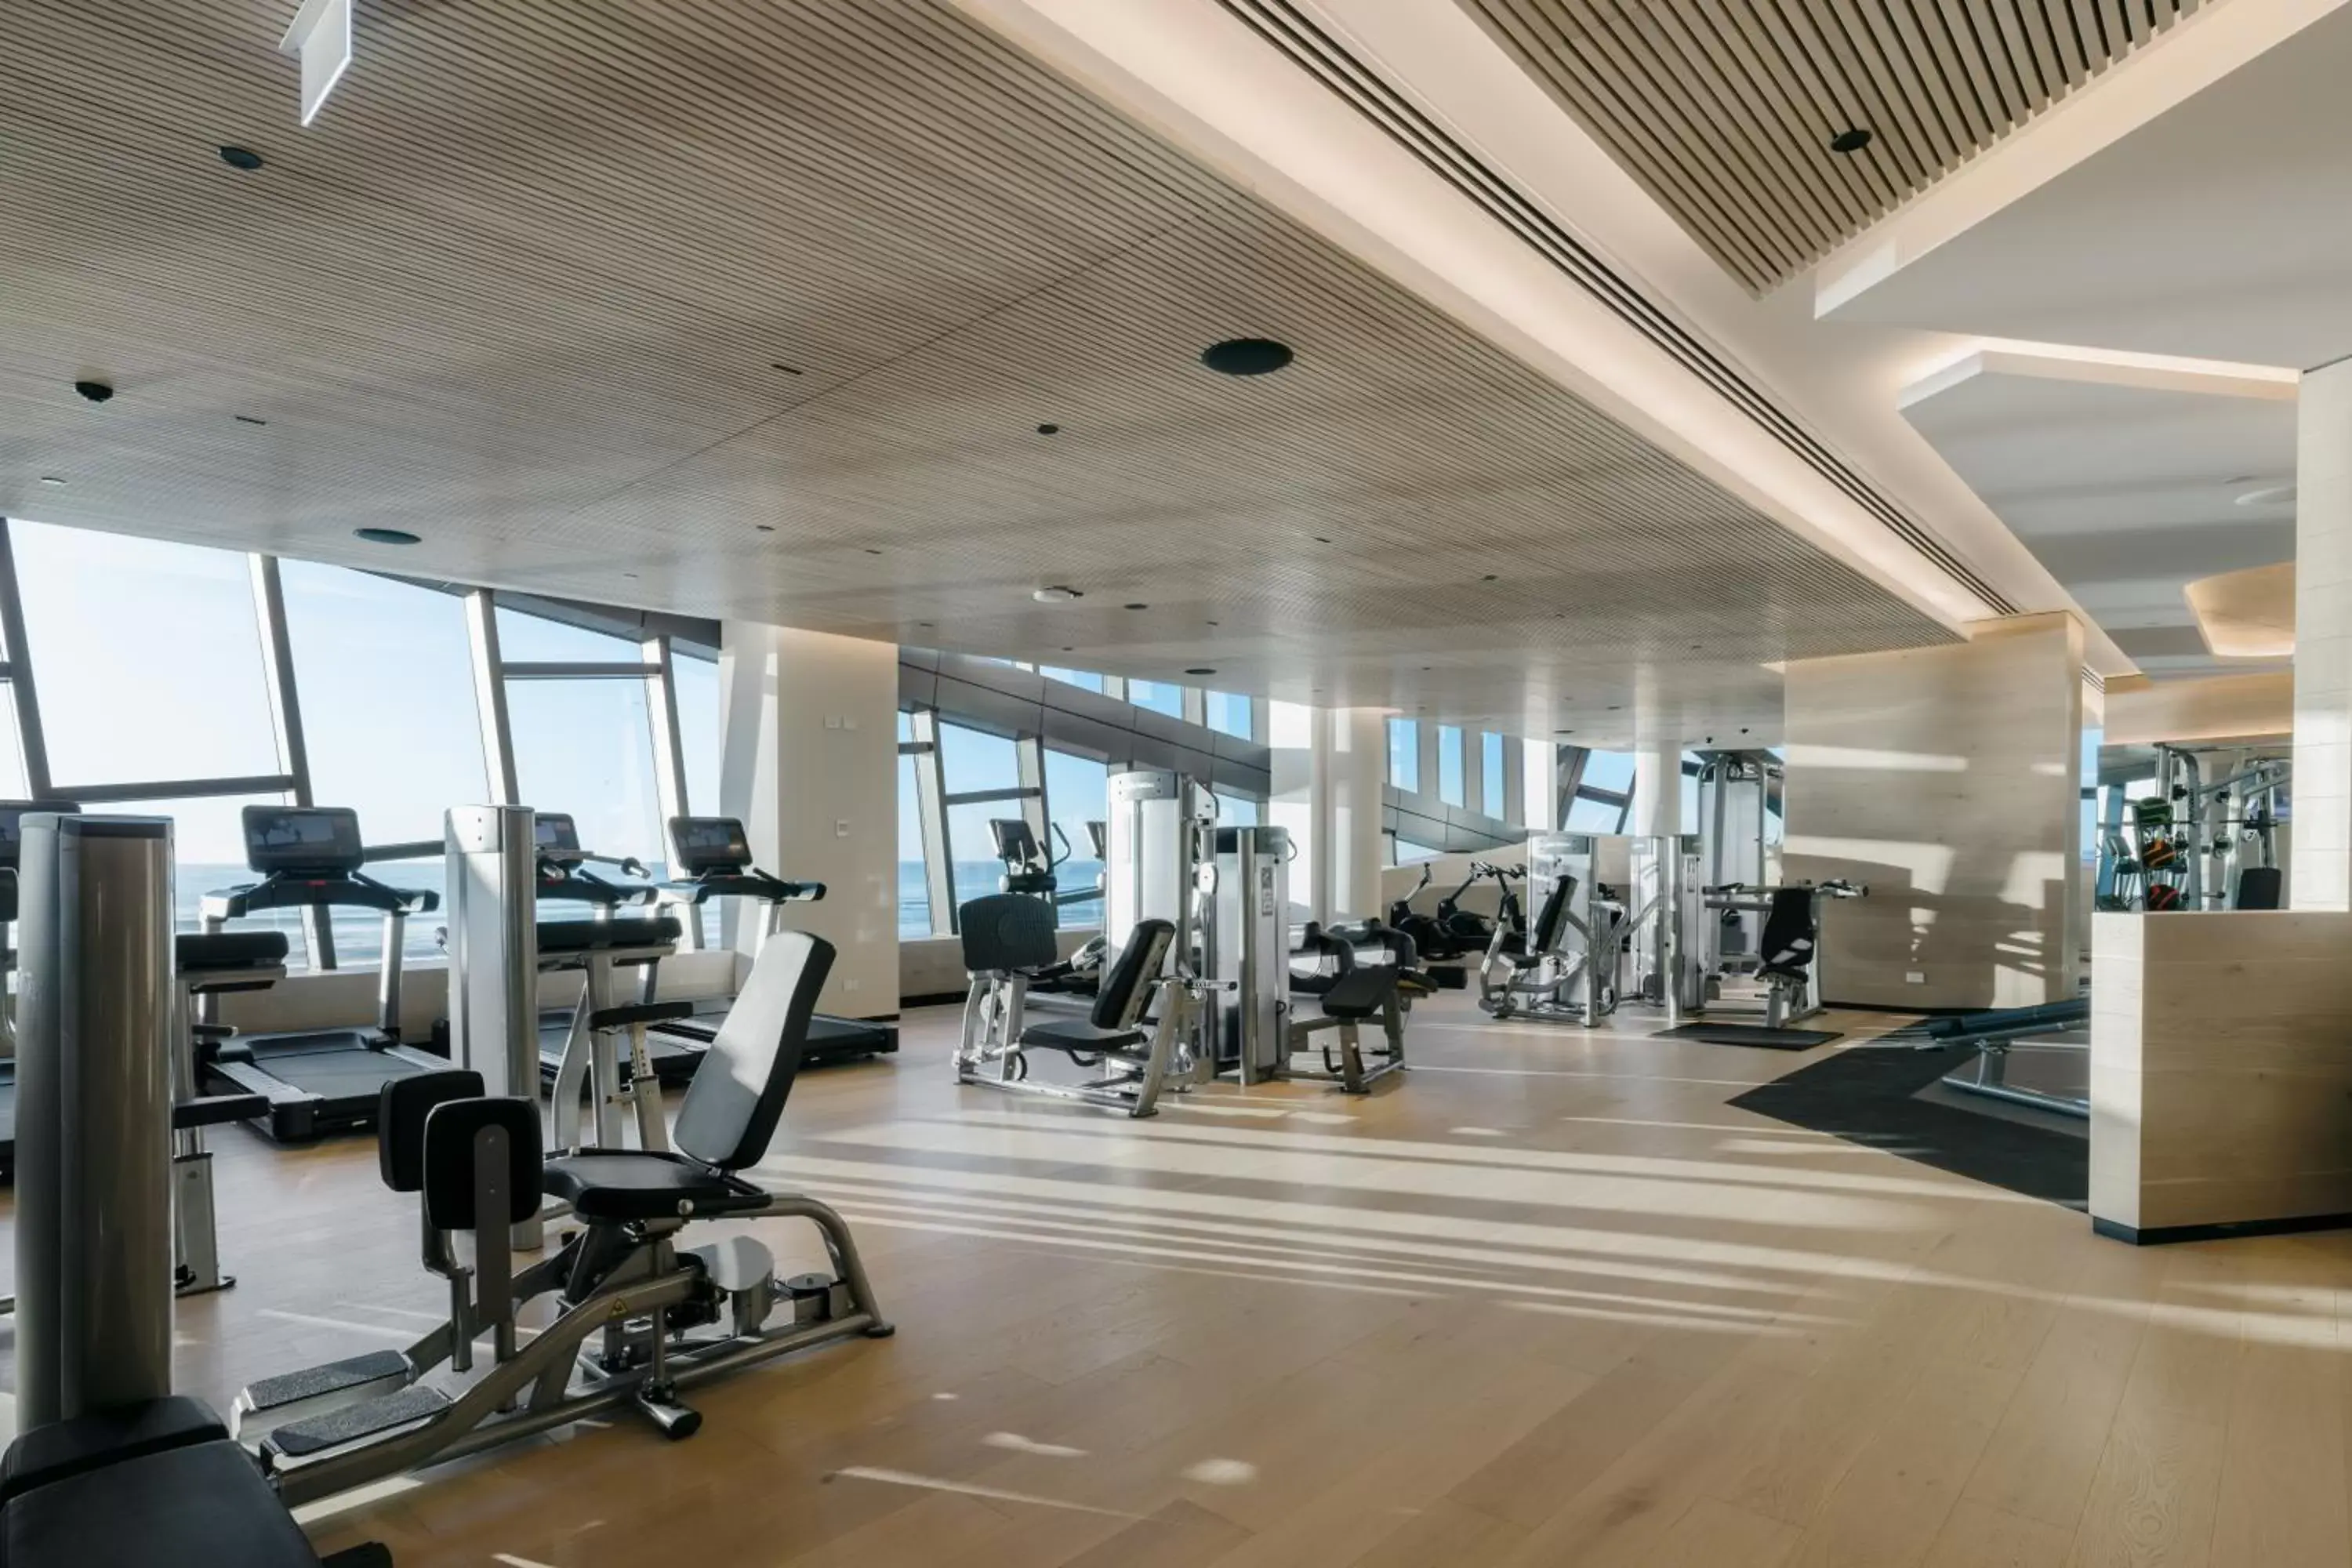 Fitness centre/facilities, Fitness Center/Facilities in The Langham, Gold Coast and Jewel Residences